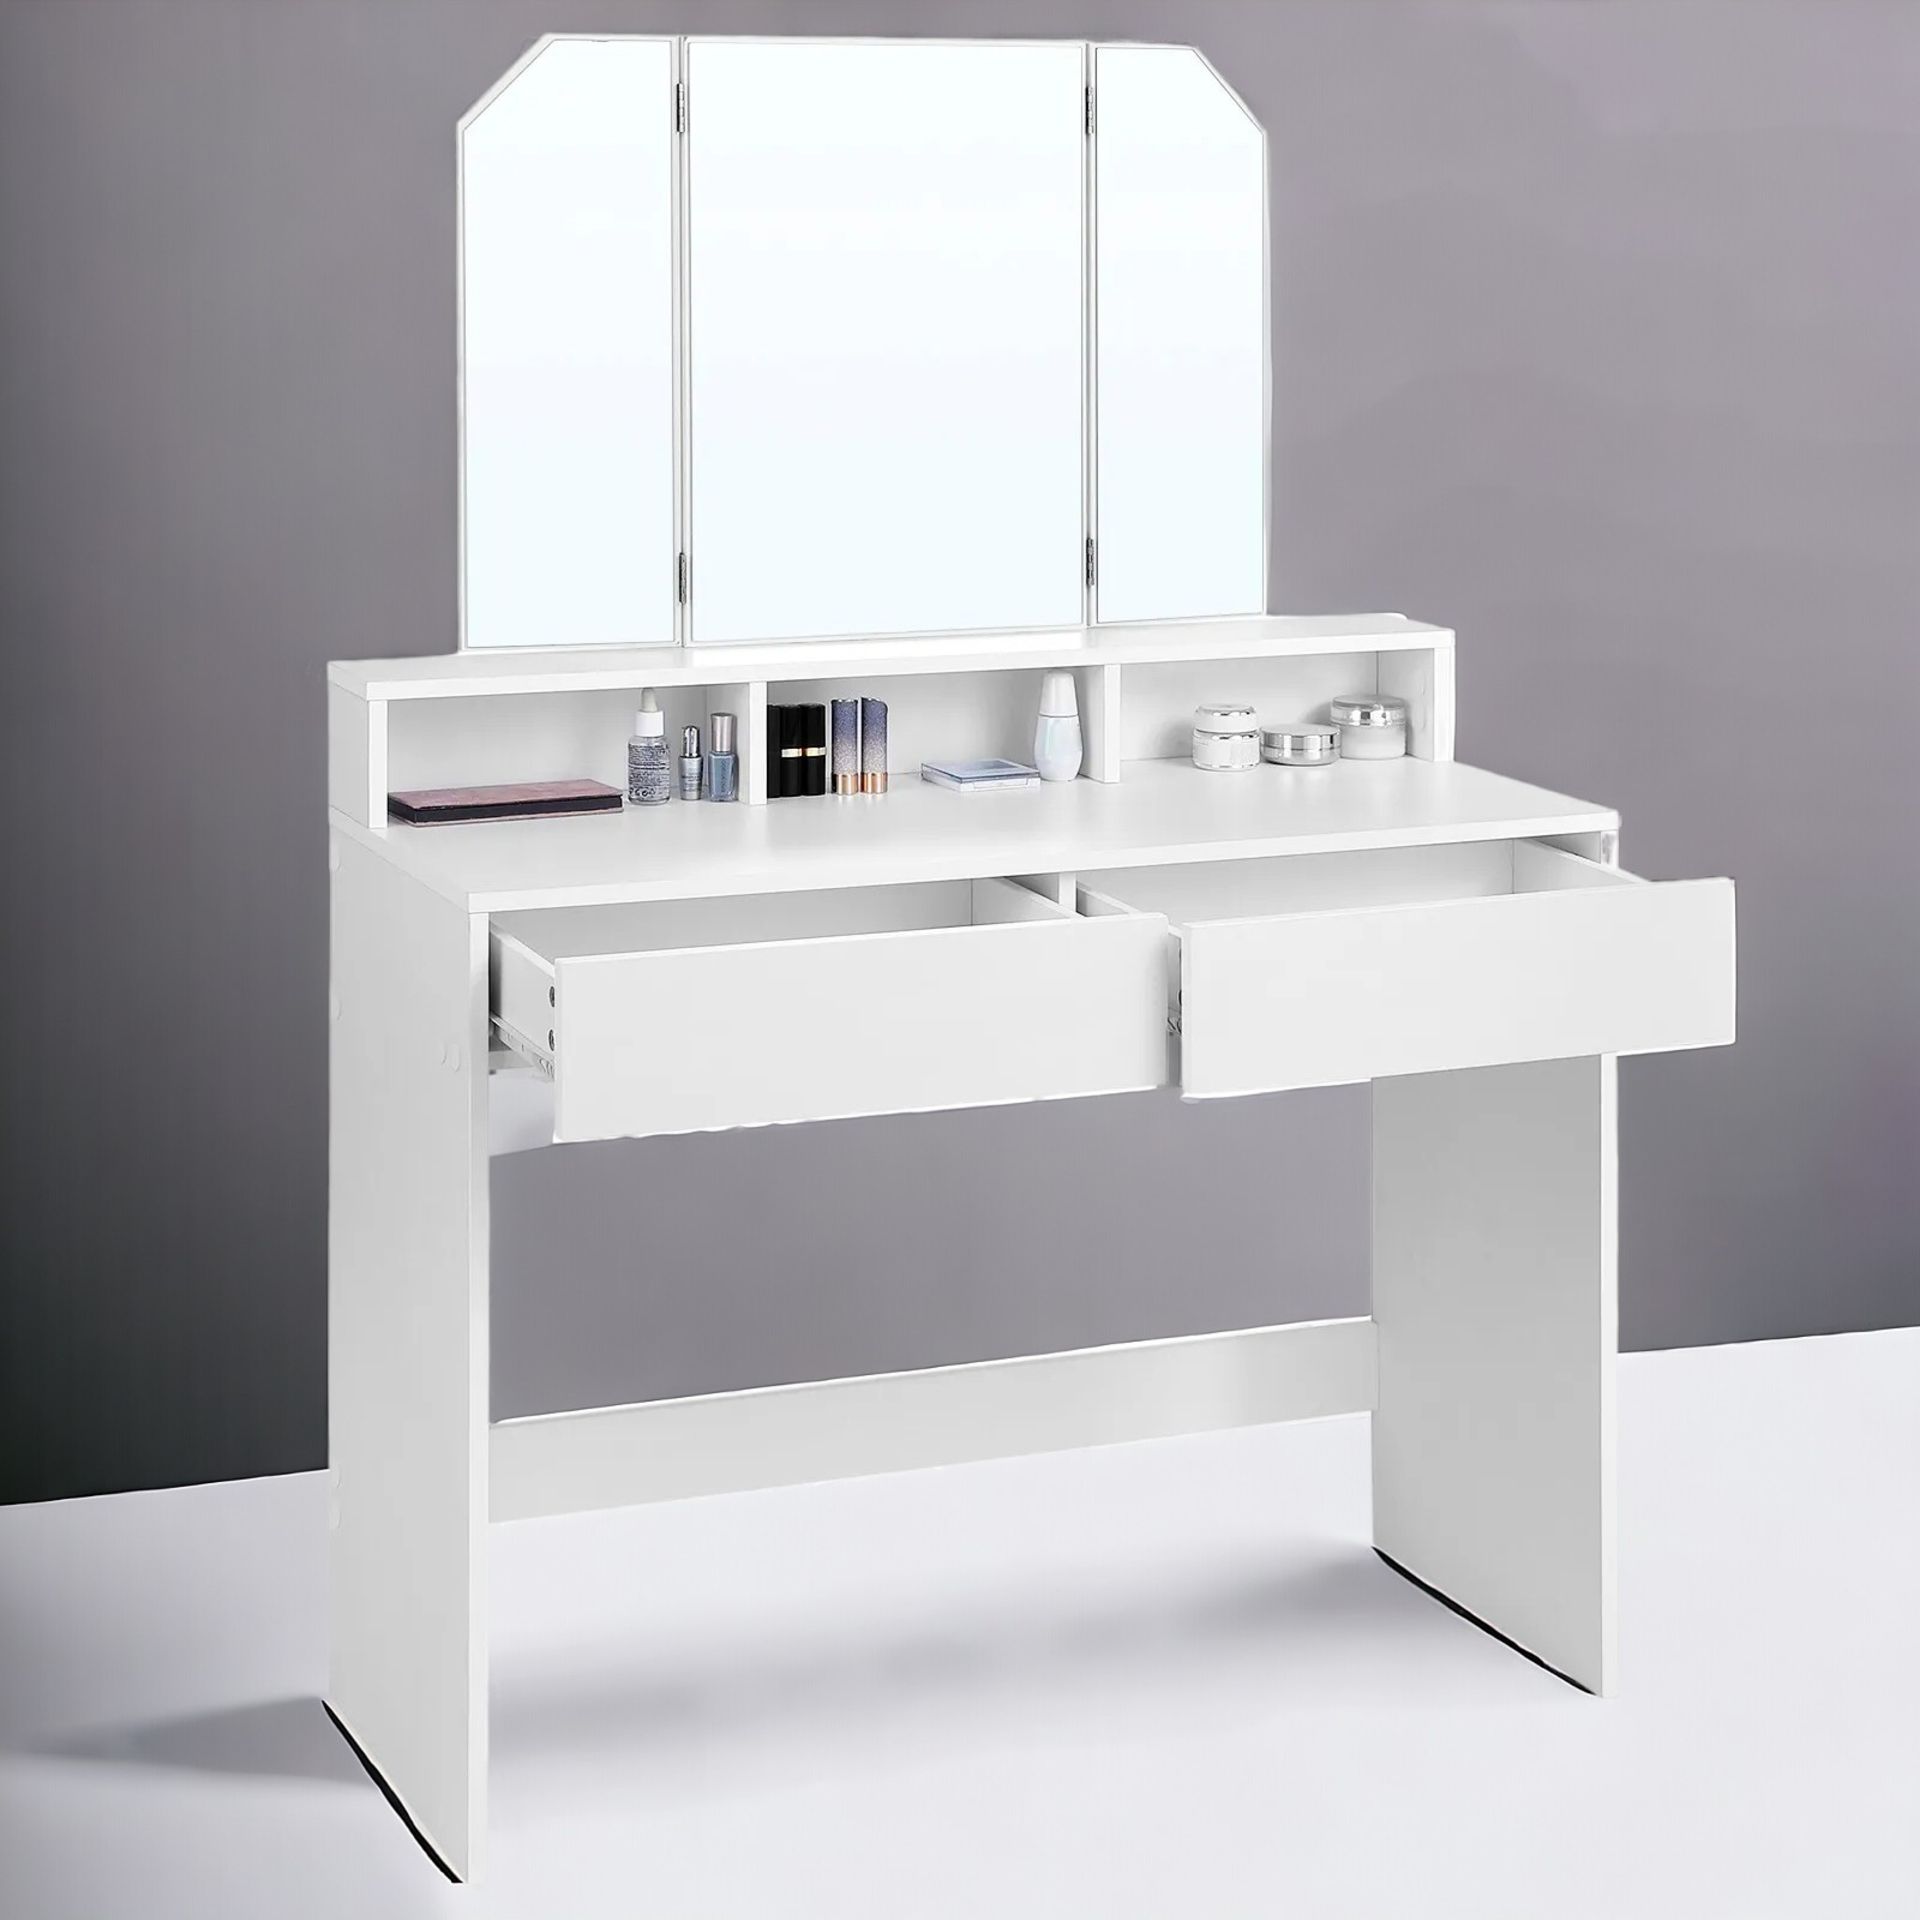 FREE DELIVERY - BRAND NEW DRESSING TABLE MIRROR MAKEUP TABLE 2 DRAWERS 3 OPEN